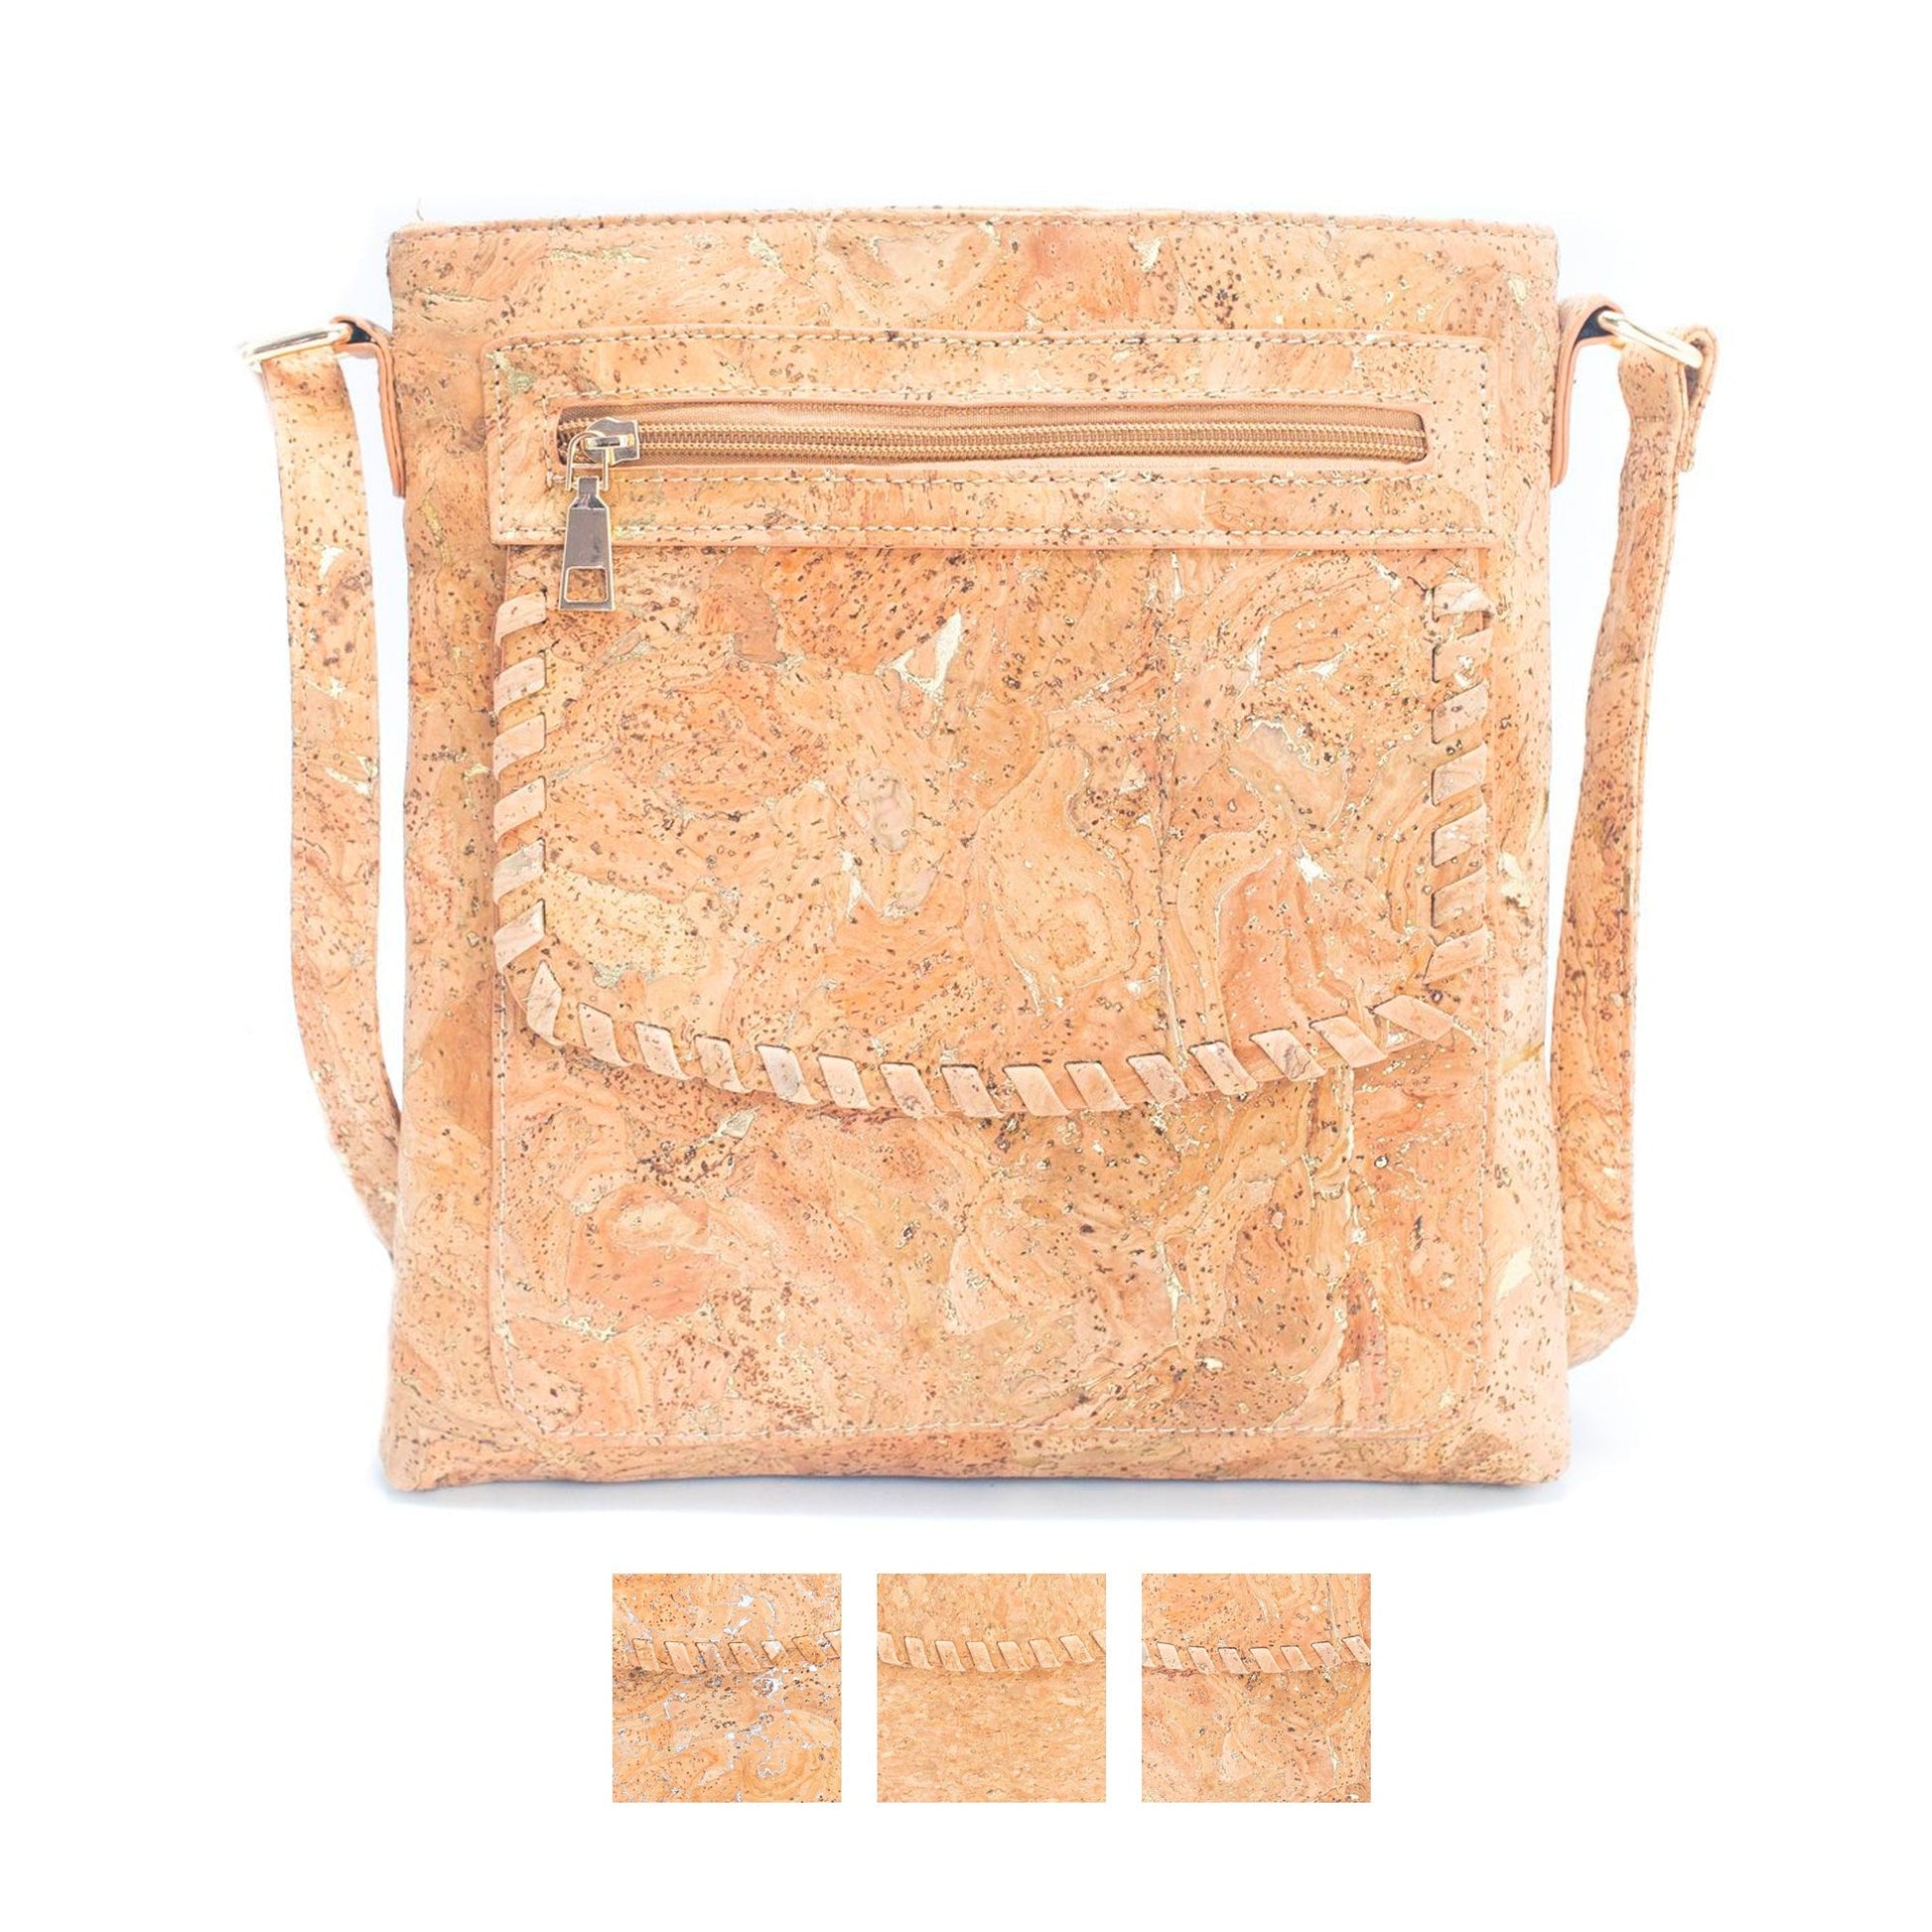 Natural Cork w/ Gold & Silver Accents Women's Crossbody Bag | THE CORK COLLECTION